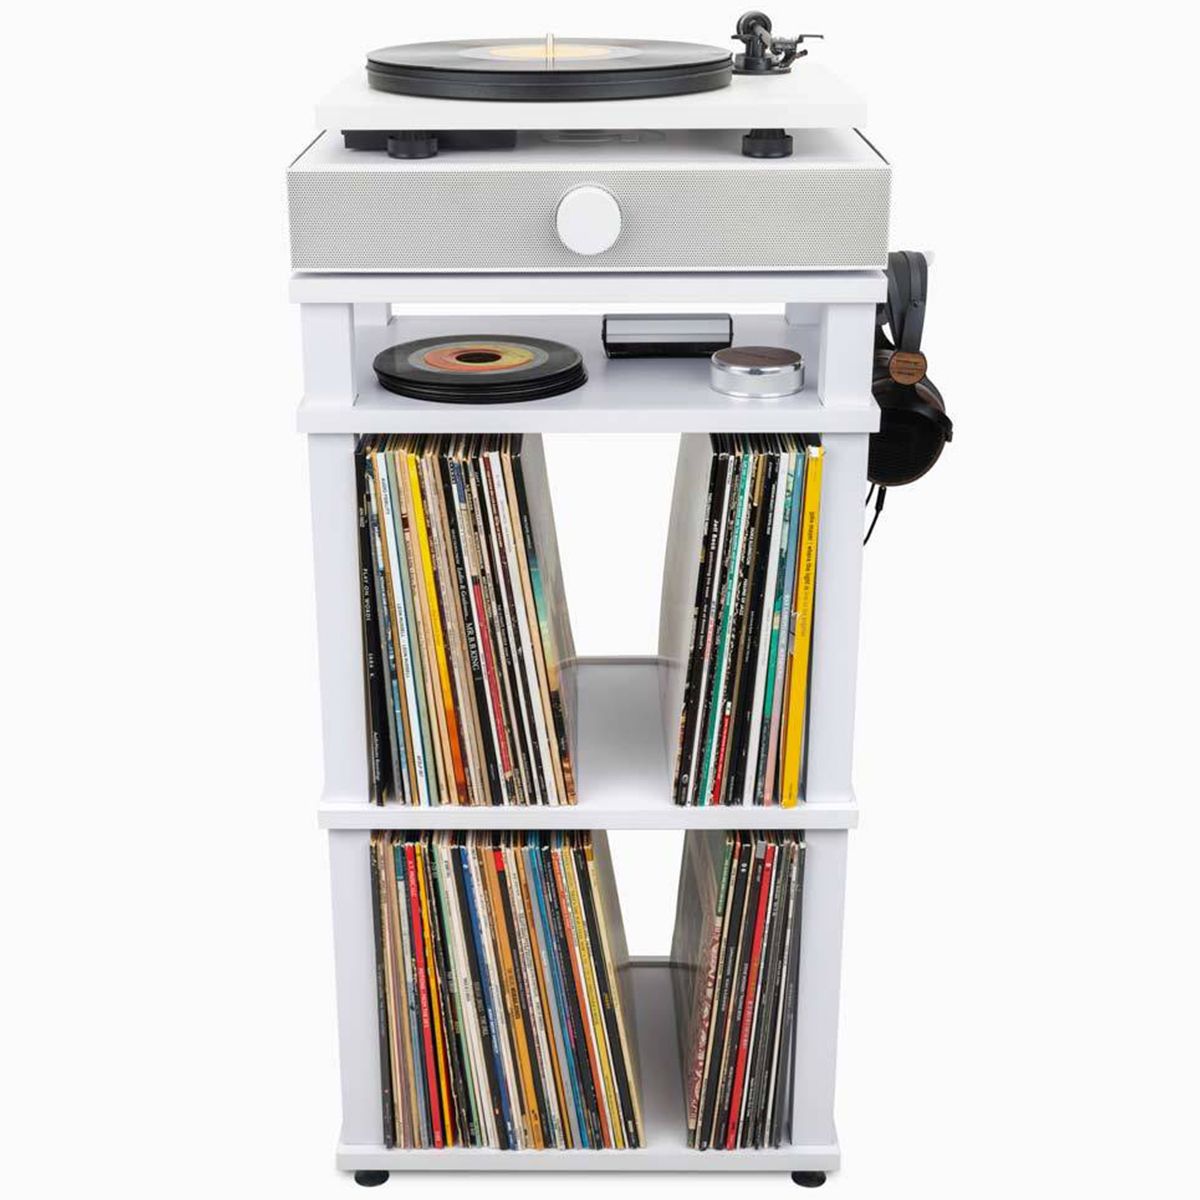 SpinStand Audio Component & Record Rack
